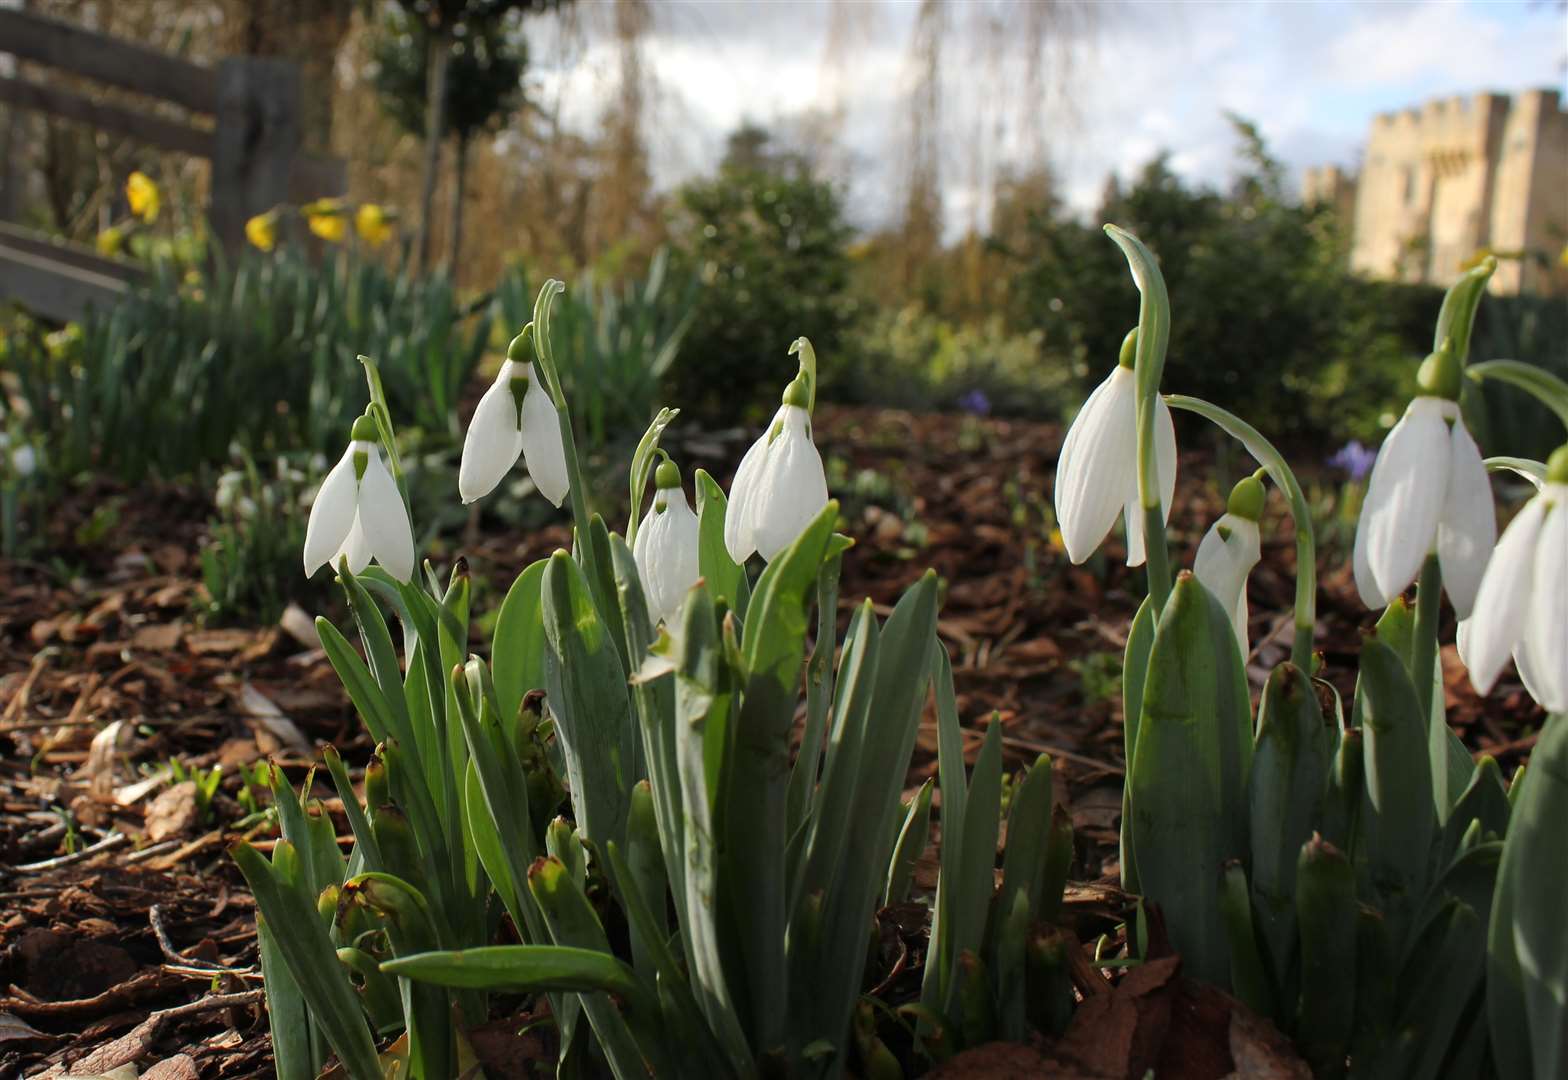 Snowdrops can be seen as the first signs of spring